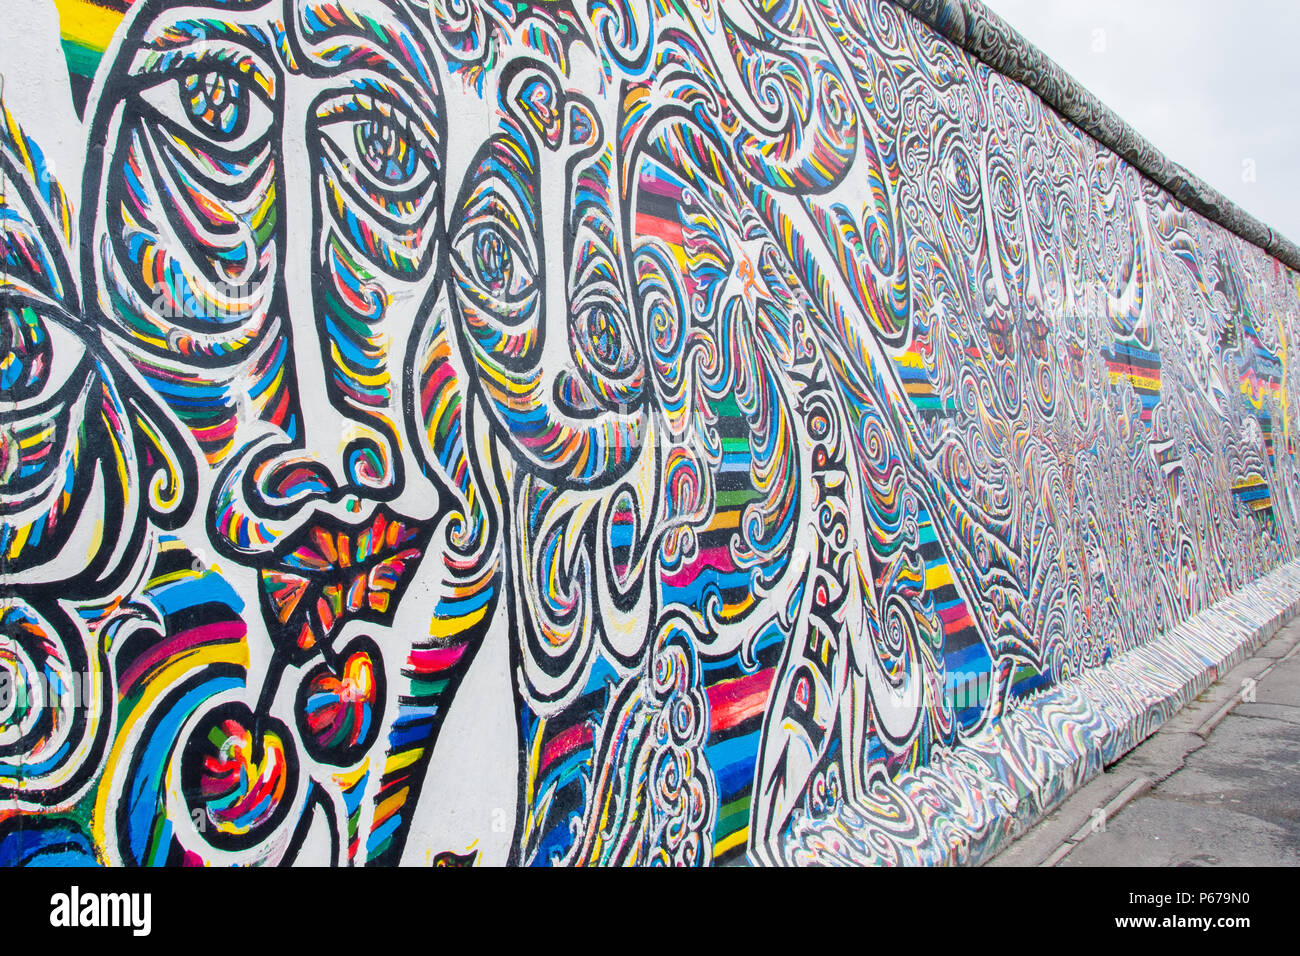 June 30, 2017: Painting and Graffiti on the Eastside gallery in Berlin, Germany. Stock Photo